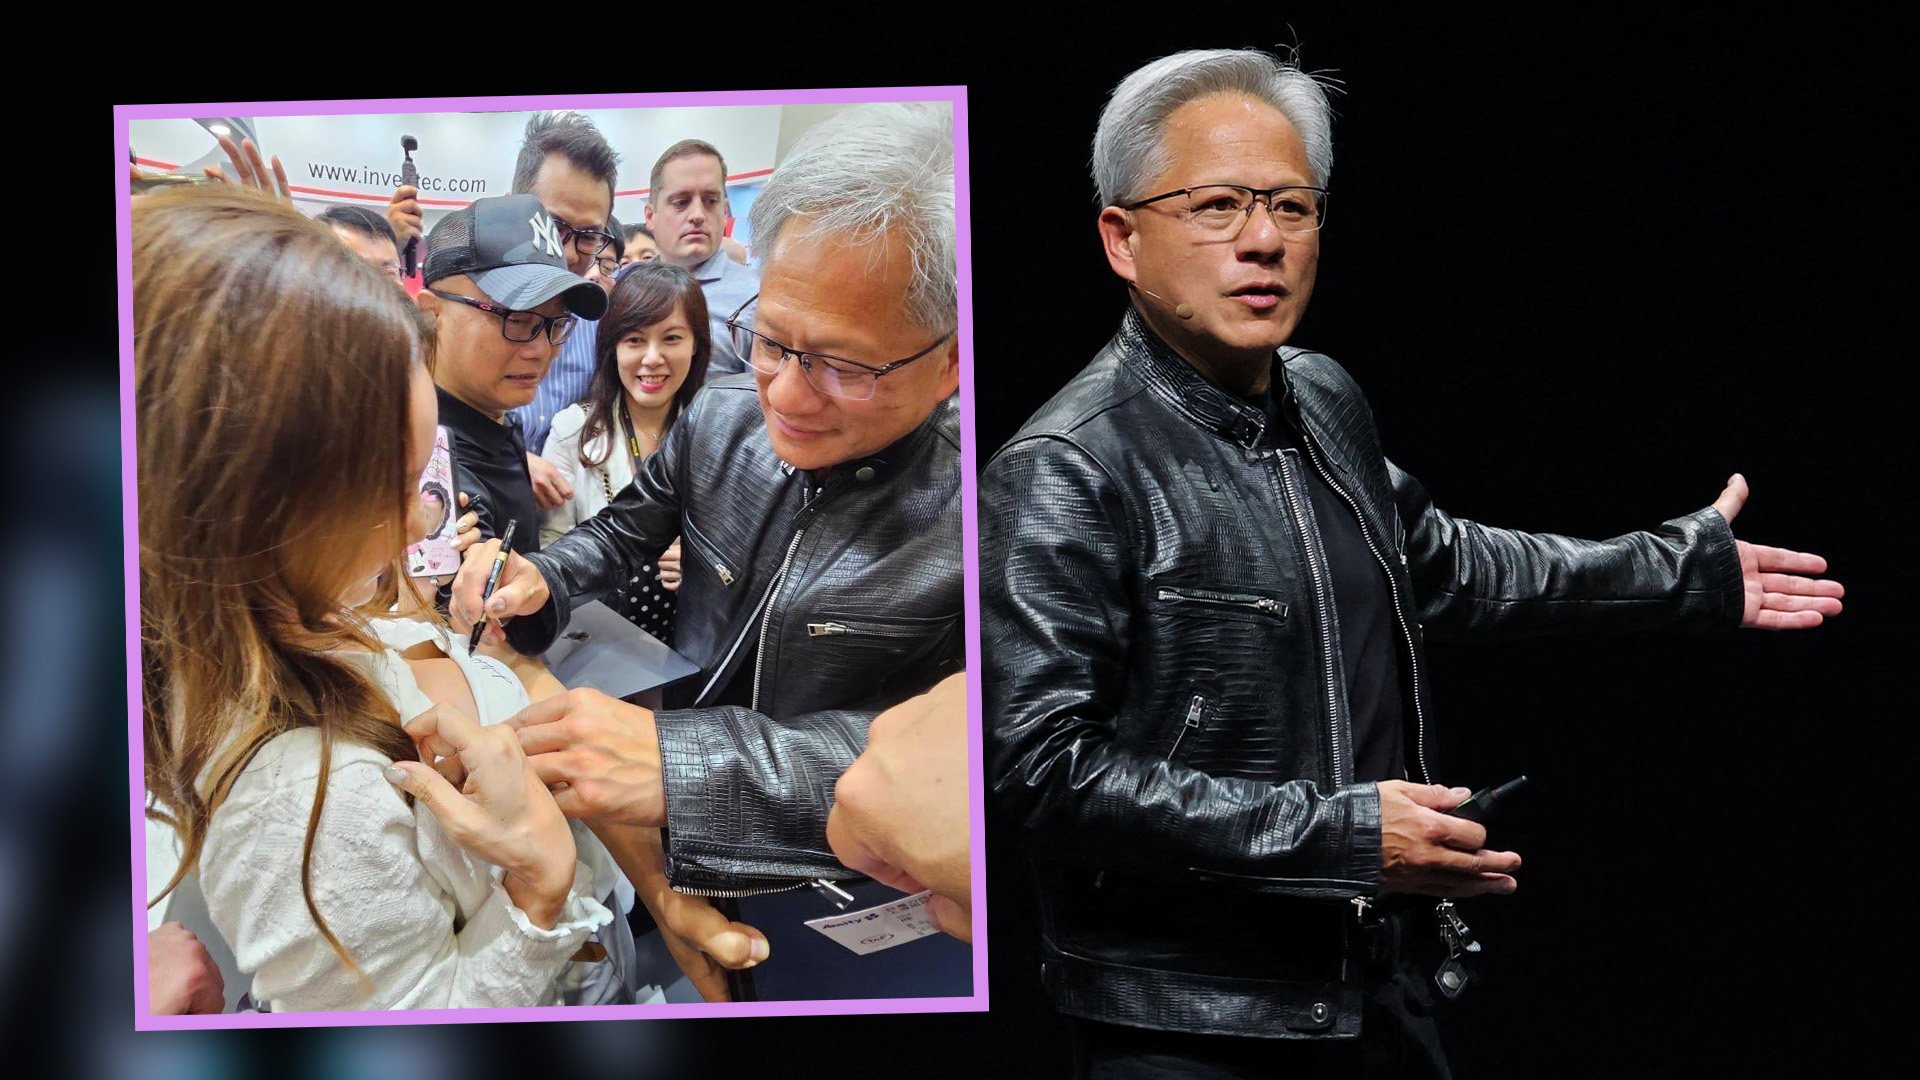 High-profile Nvidia CEO Jensen Huang has sparked an online and media frenzy by signing his name on the tight-fitting top of a woman at a tech expo in Taiwan. Photo: SCMP composite/X.com/Reuters